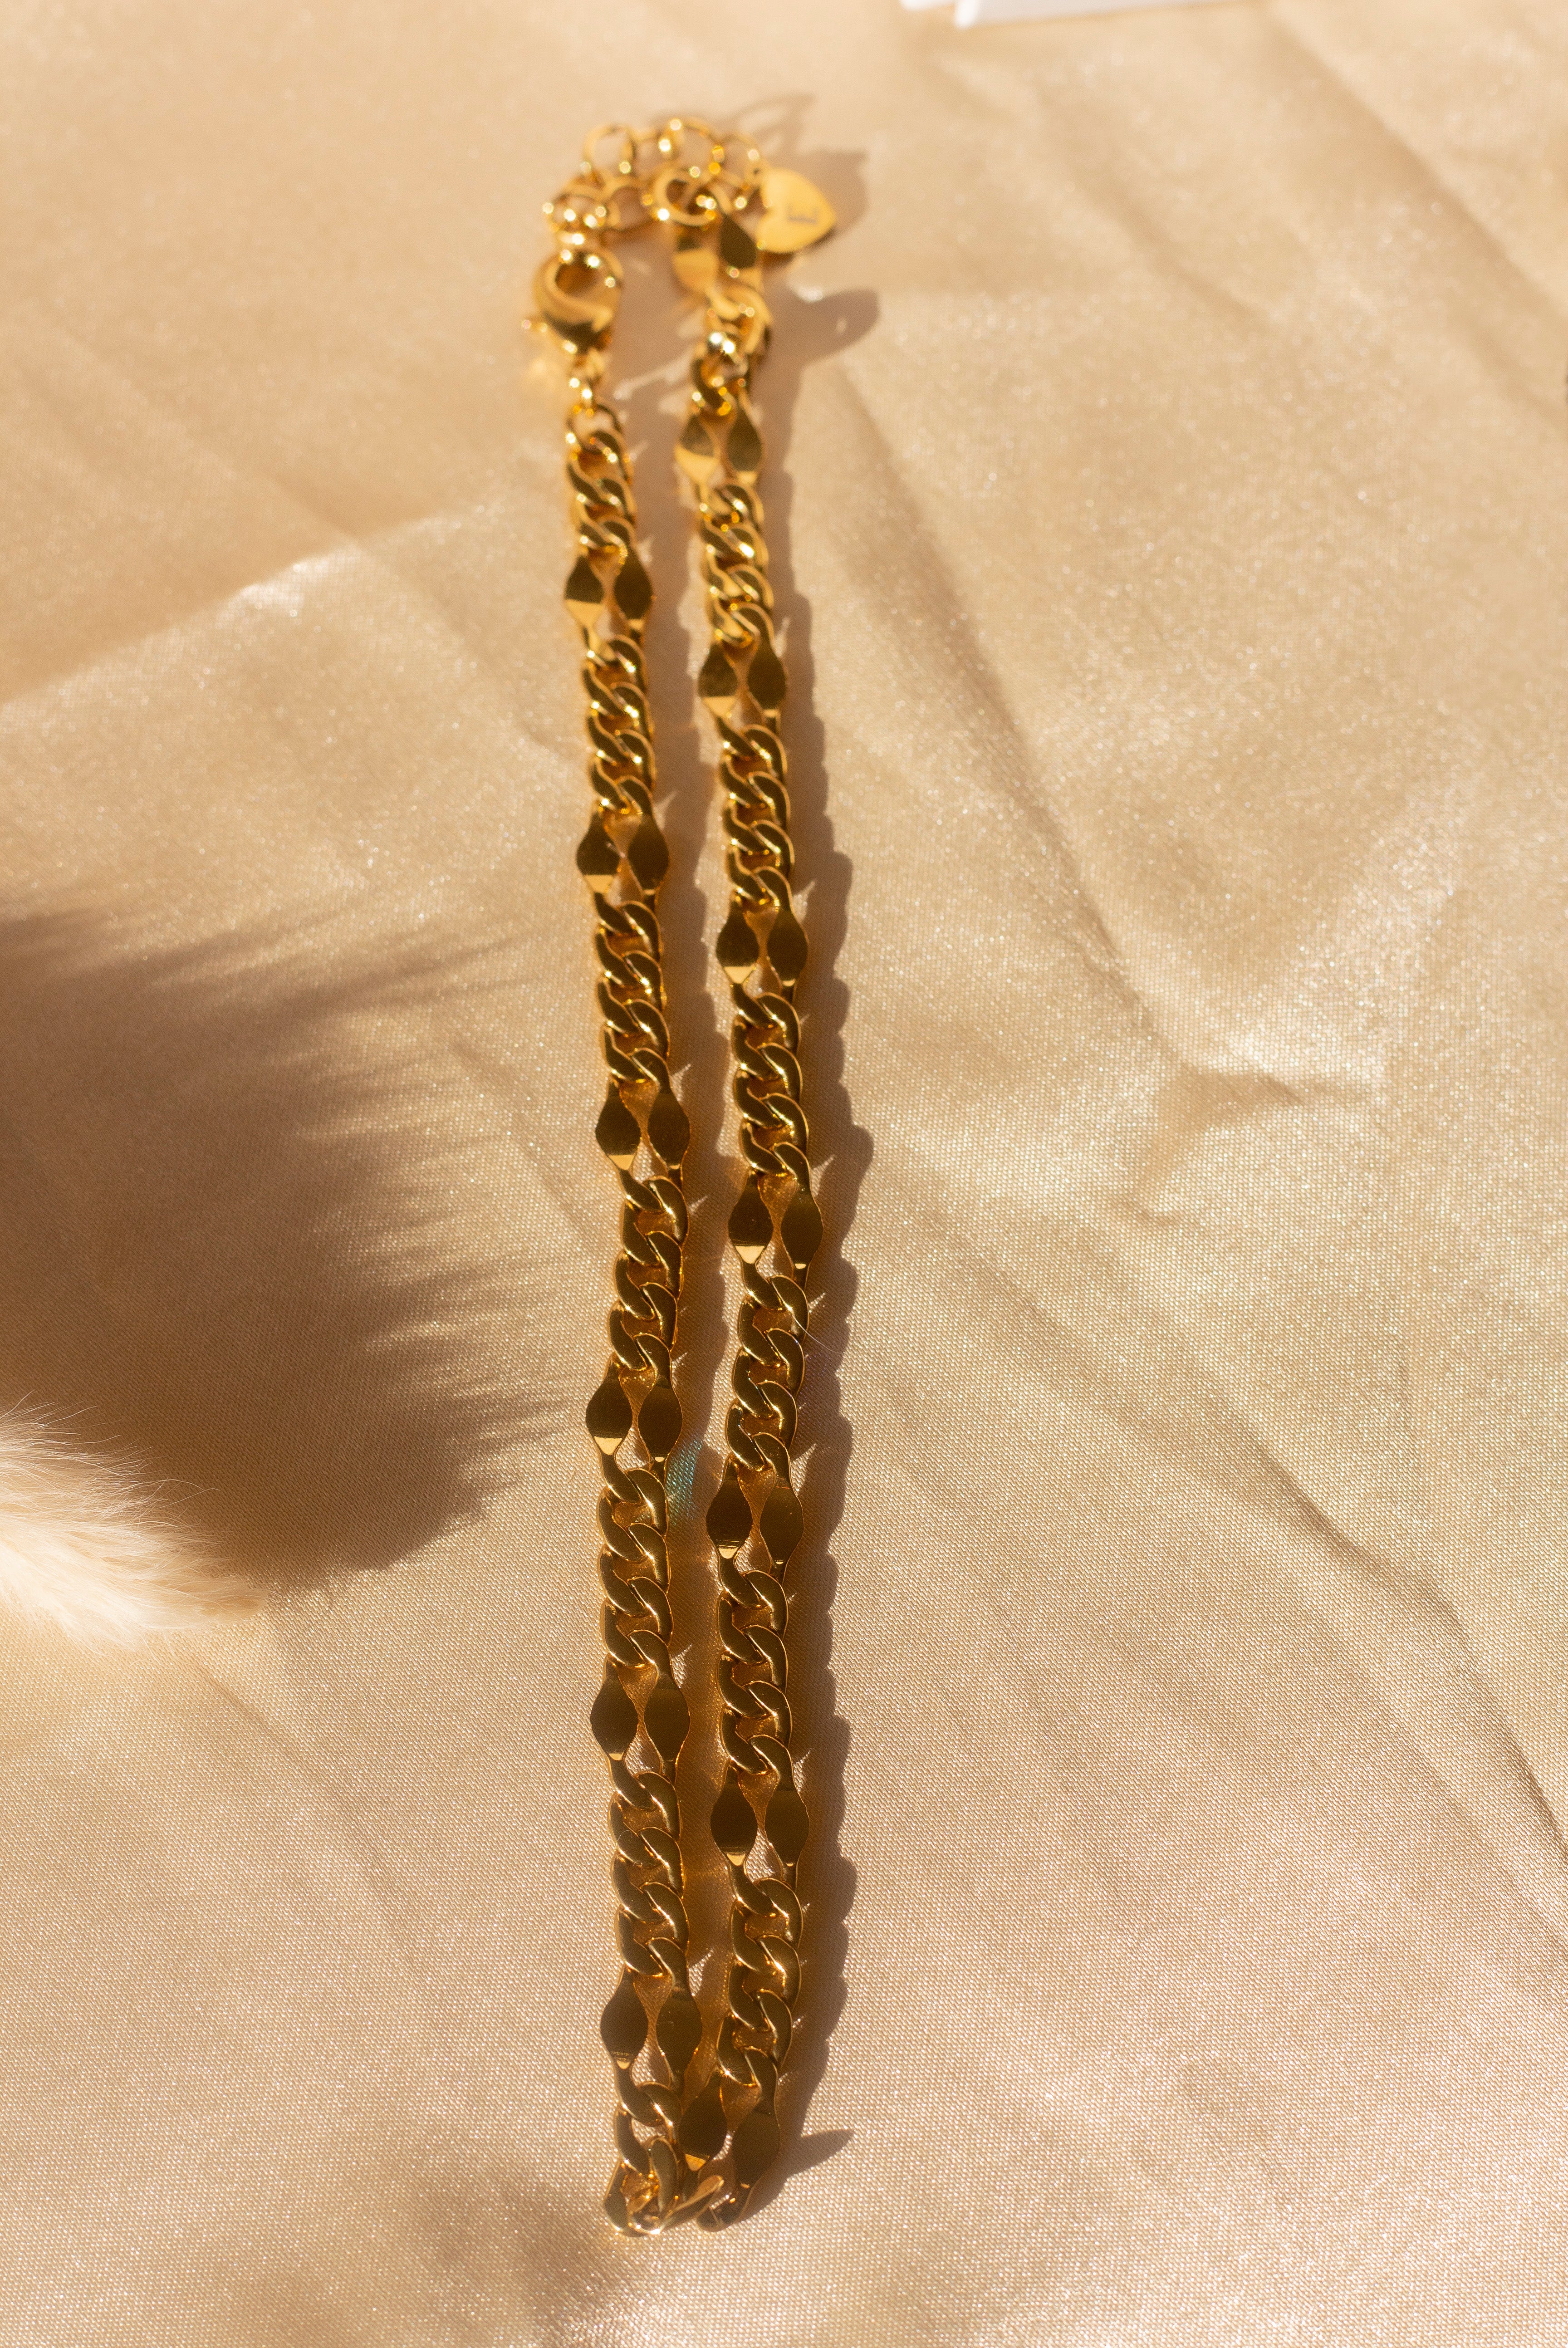 18k gold chain necklace placed on a beige cloth. Ella Figaro Necklace by E's Element.